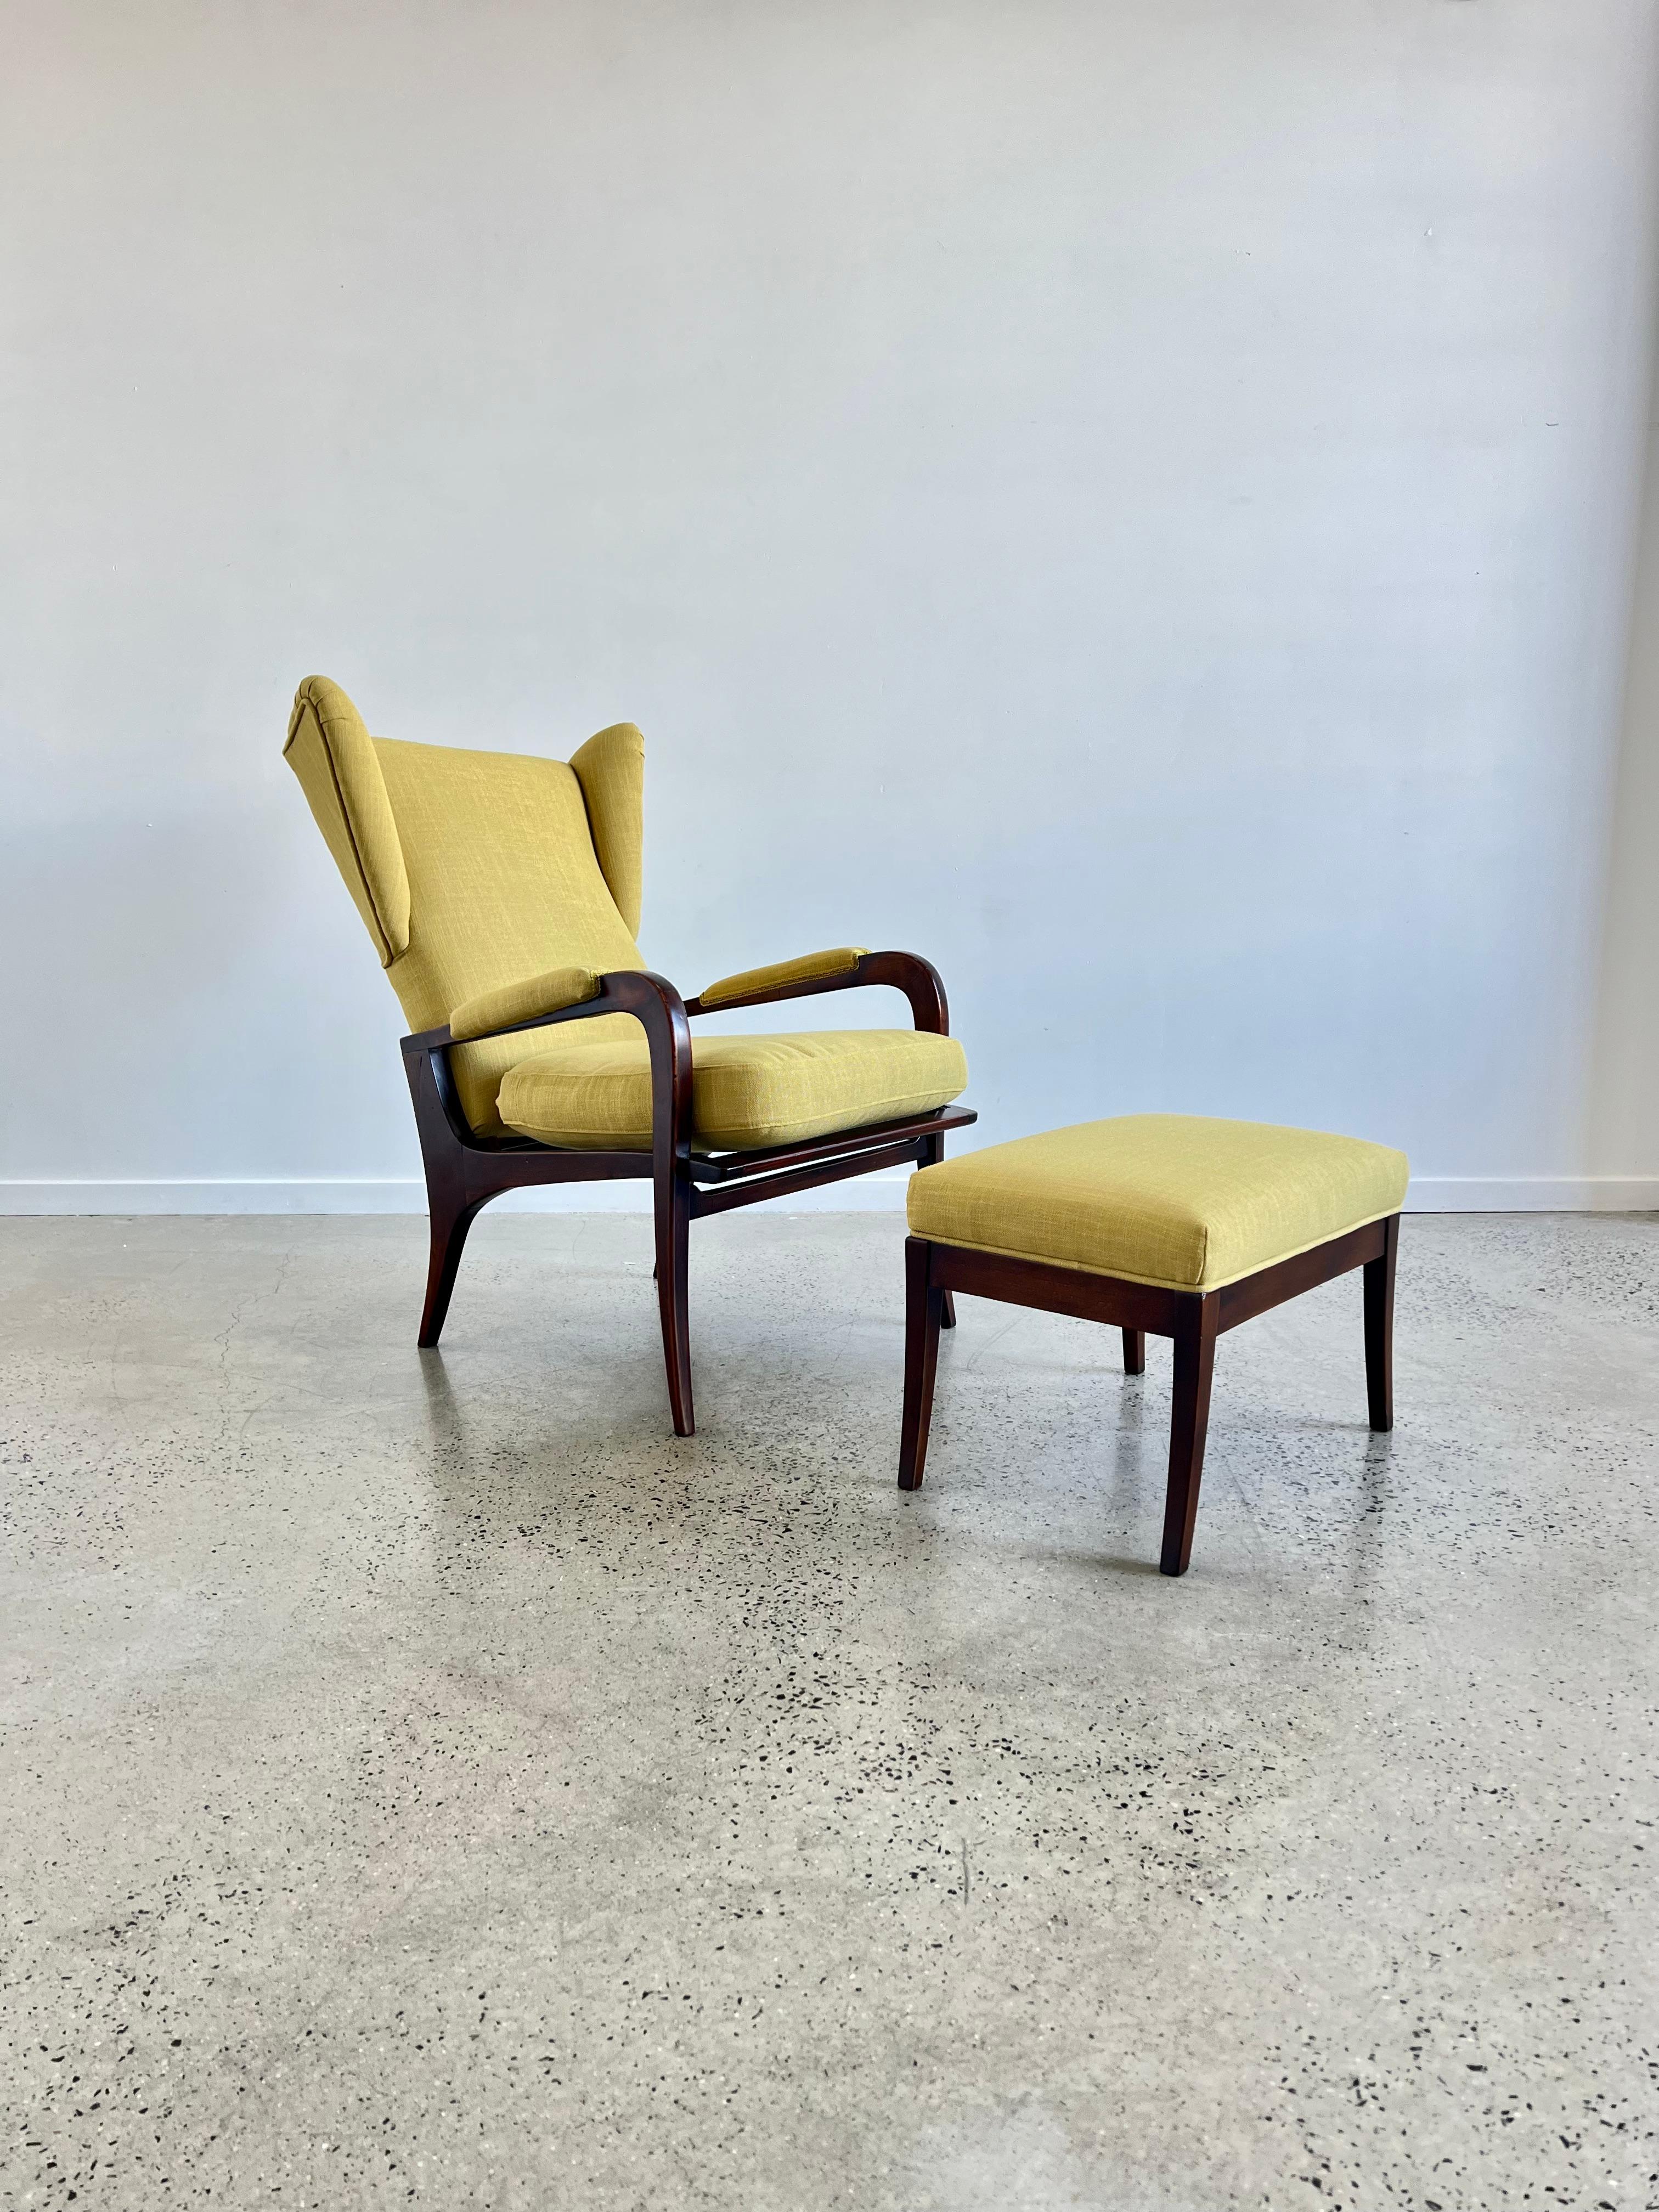 Renzo Franchi for Brianzola sculptural 'Camea' lounge reclinable armchair with ottoman, cherry wood frames and upholstered back, seat and padded arms, Italy, 1950s. These incredibly chic lounge chairs are truly a modernist mid-century Italian design